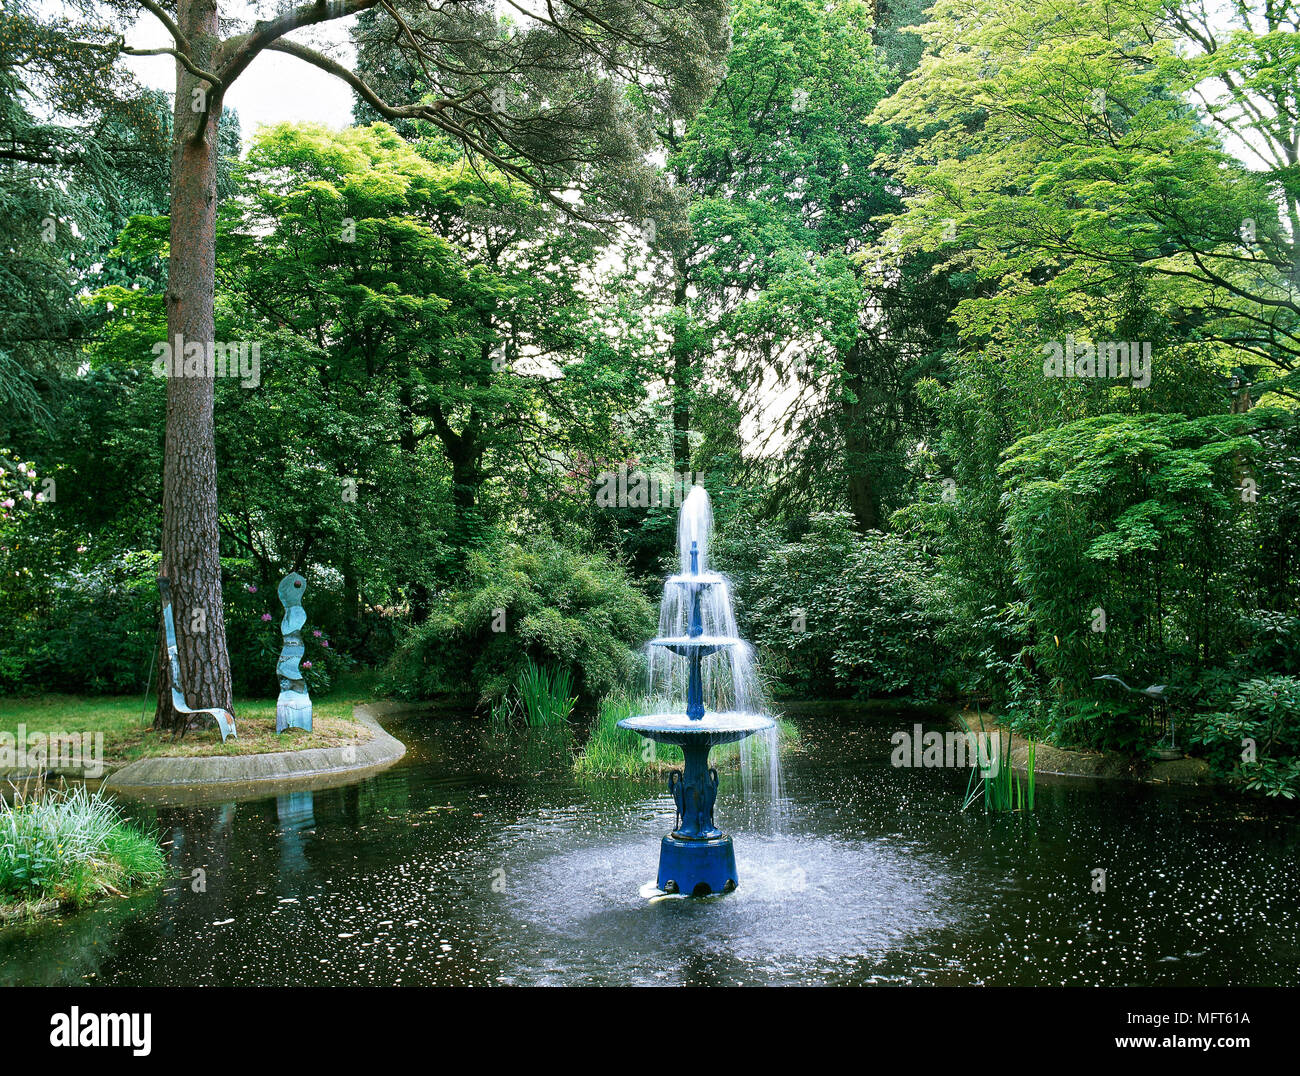 Woodland garden with pond and fountain water feature Stock Photo